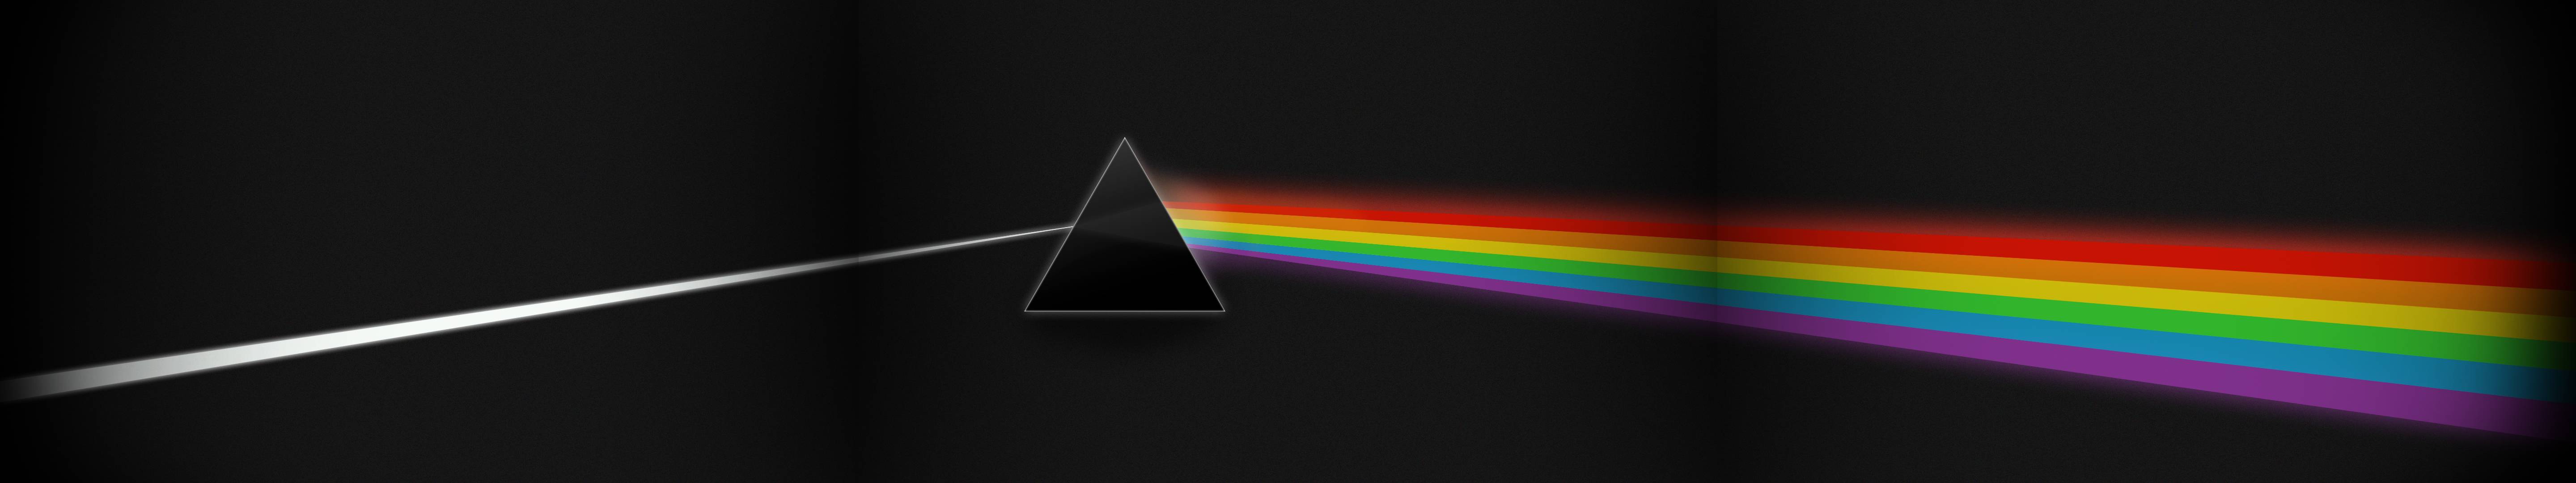 More Like Dark Side of the Moon Monitor